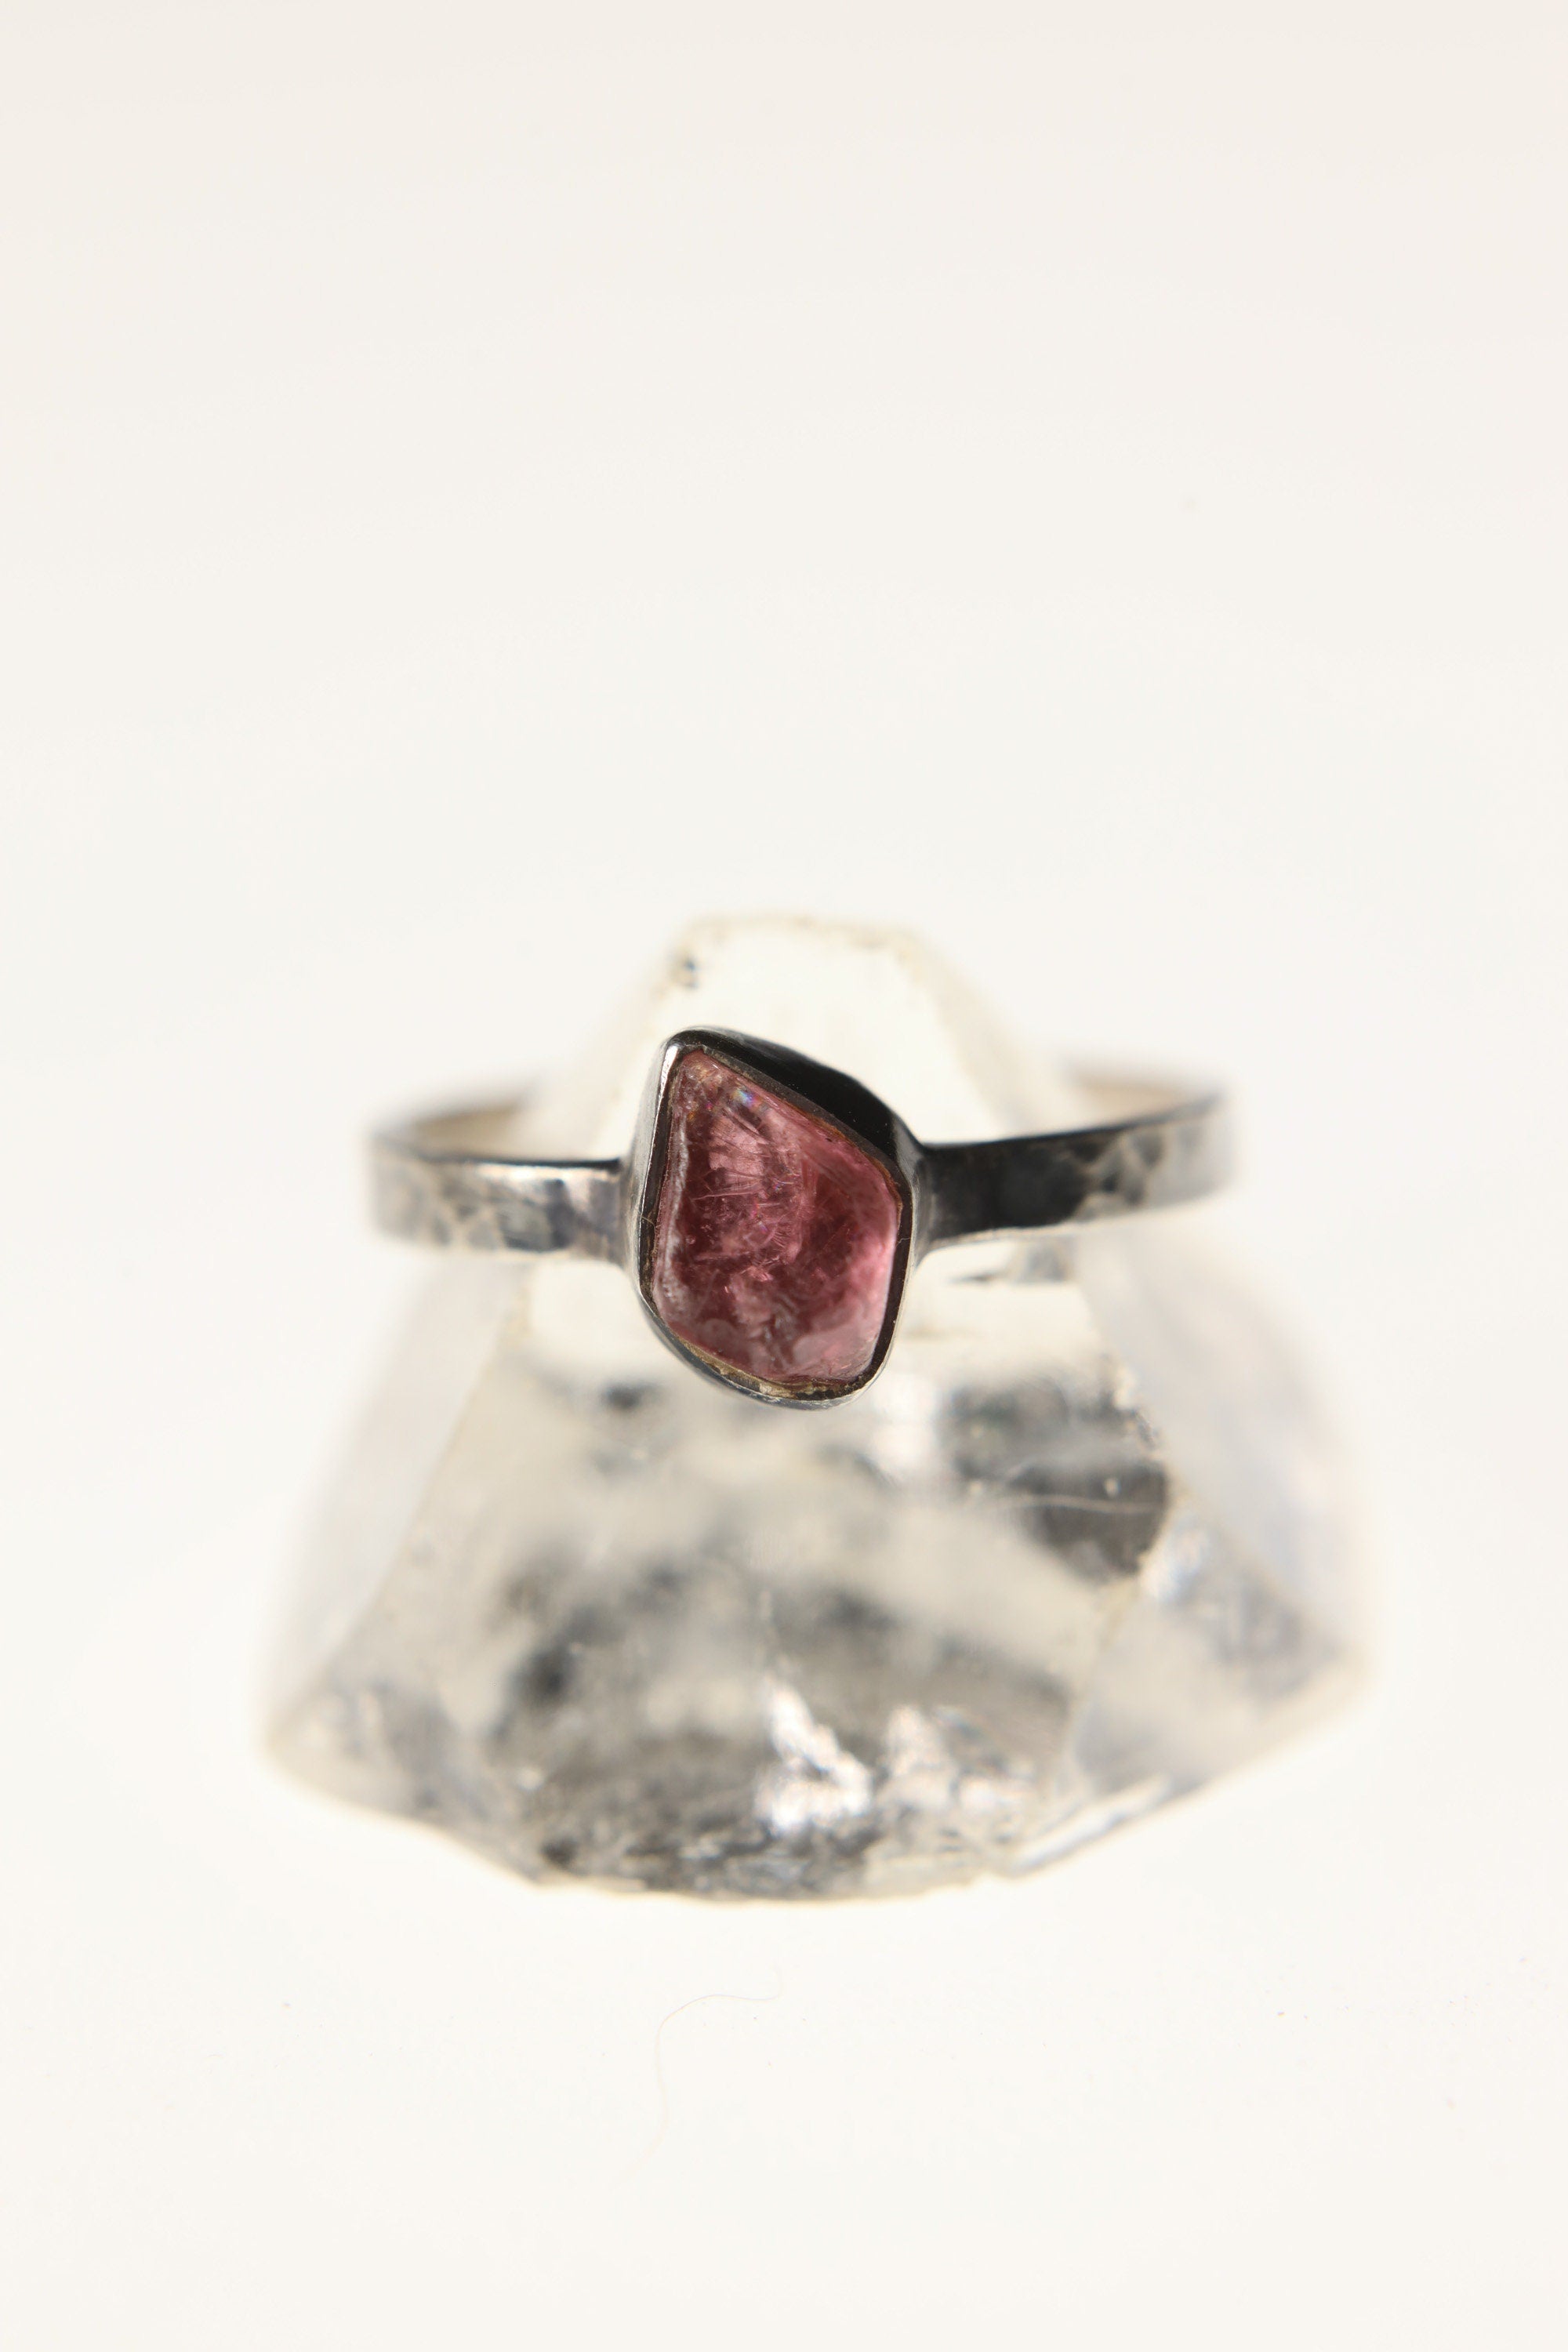 Eternal Blush - Sterling Silver Ring with Pink Tourmaline - Size 7 US - NO/02